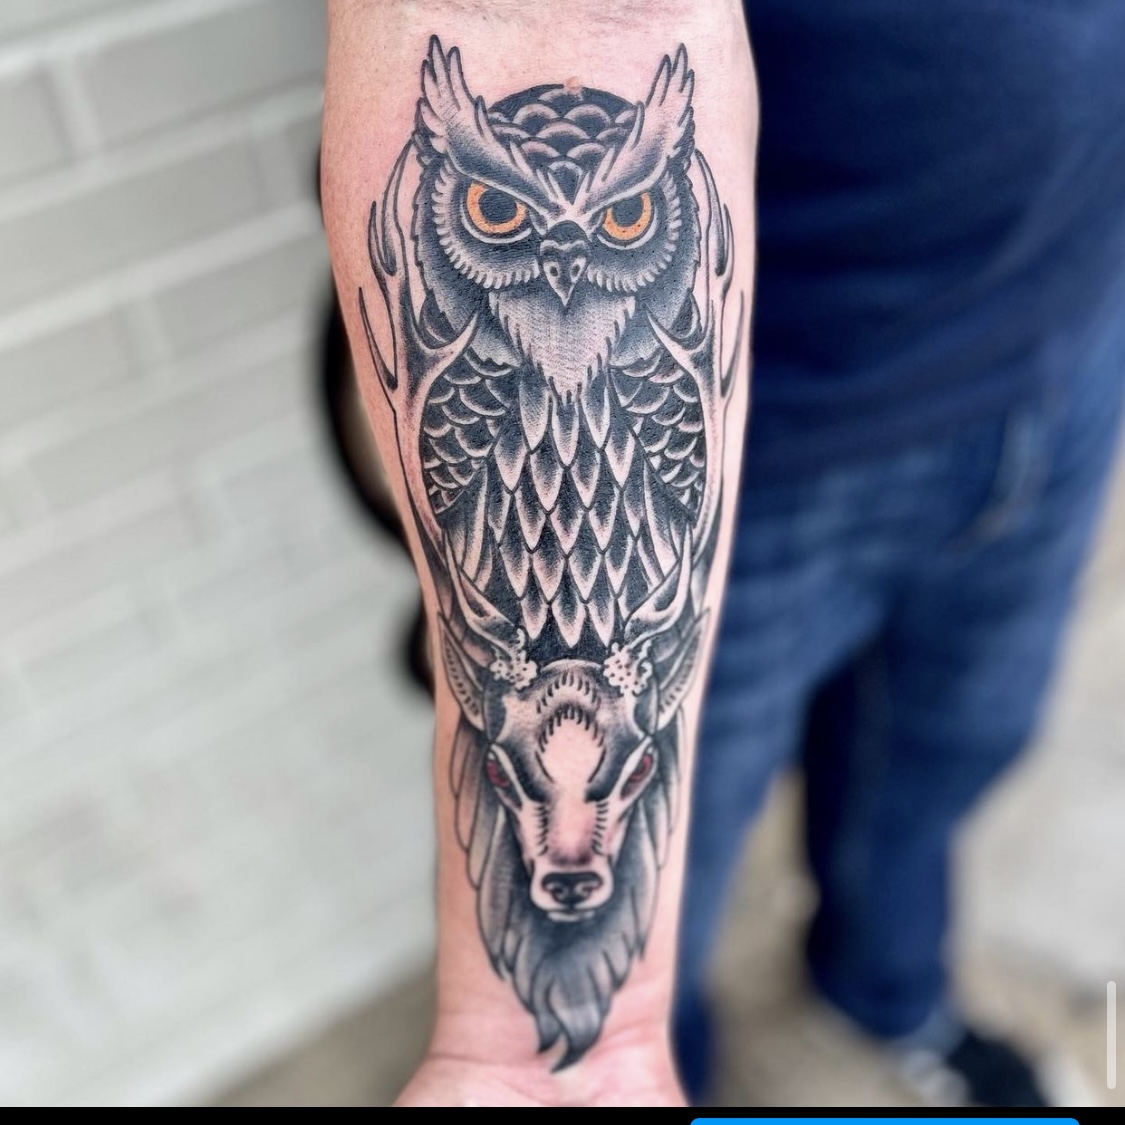 Tattoo of an Owl from best tattoo shops in dallas tx